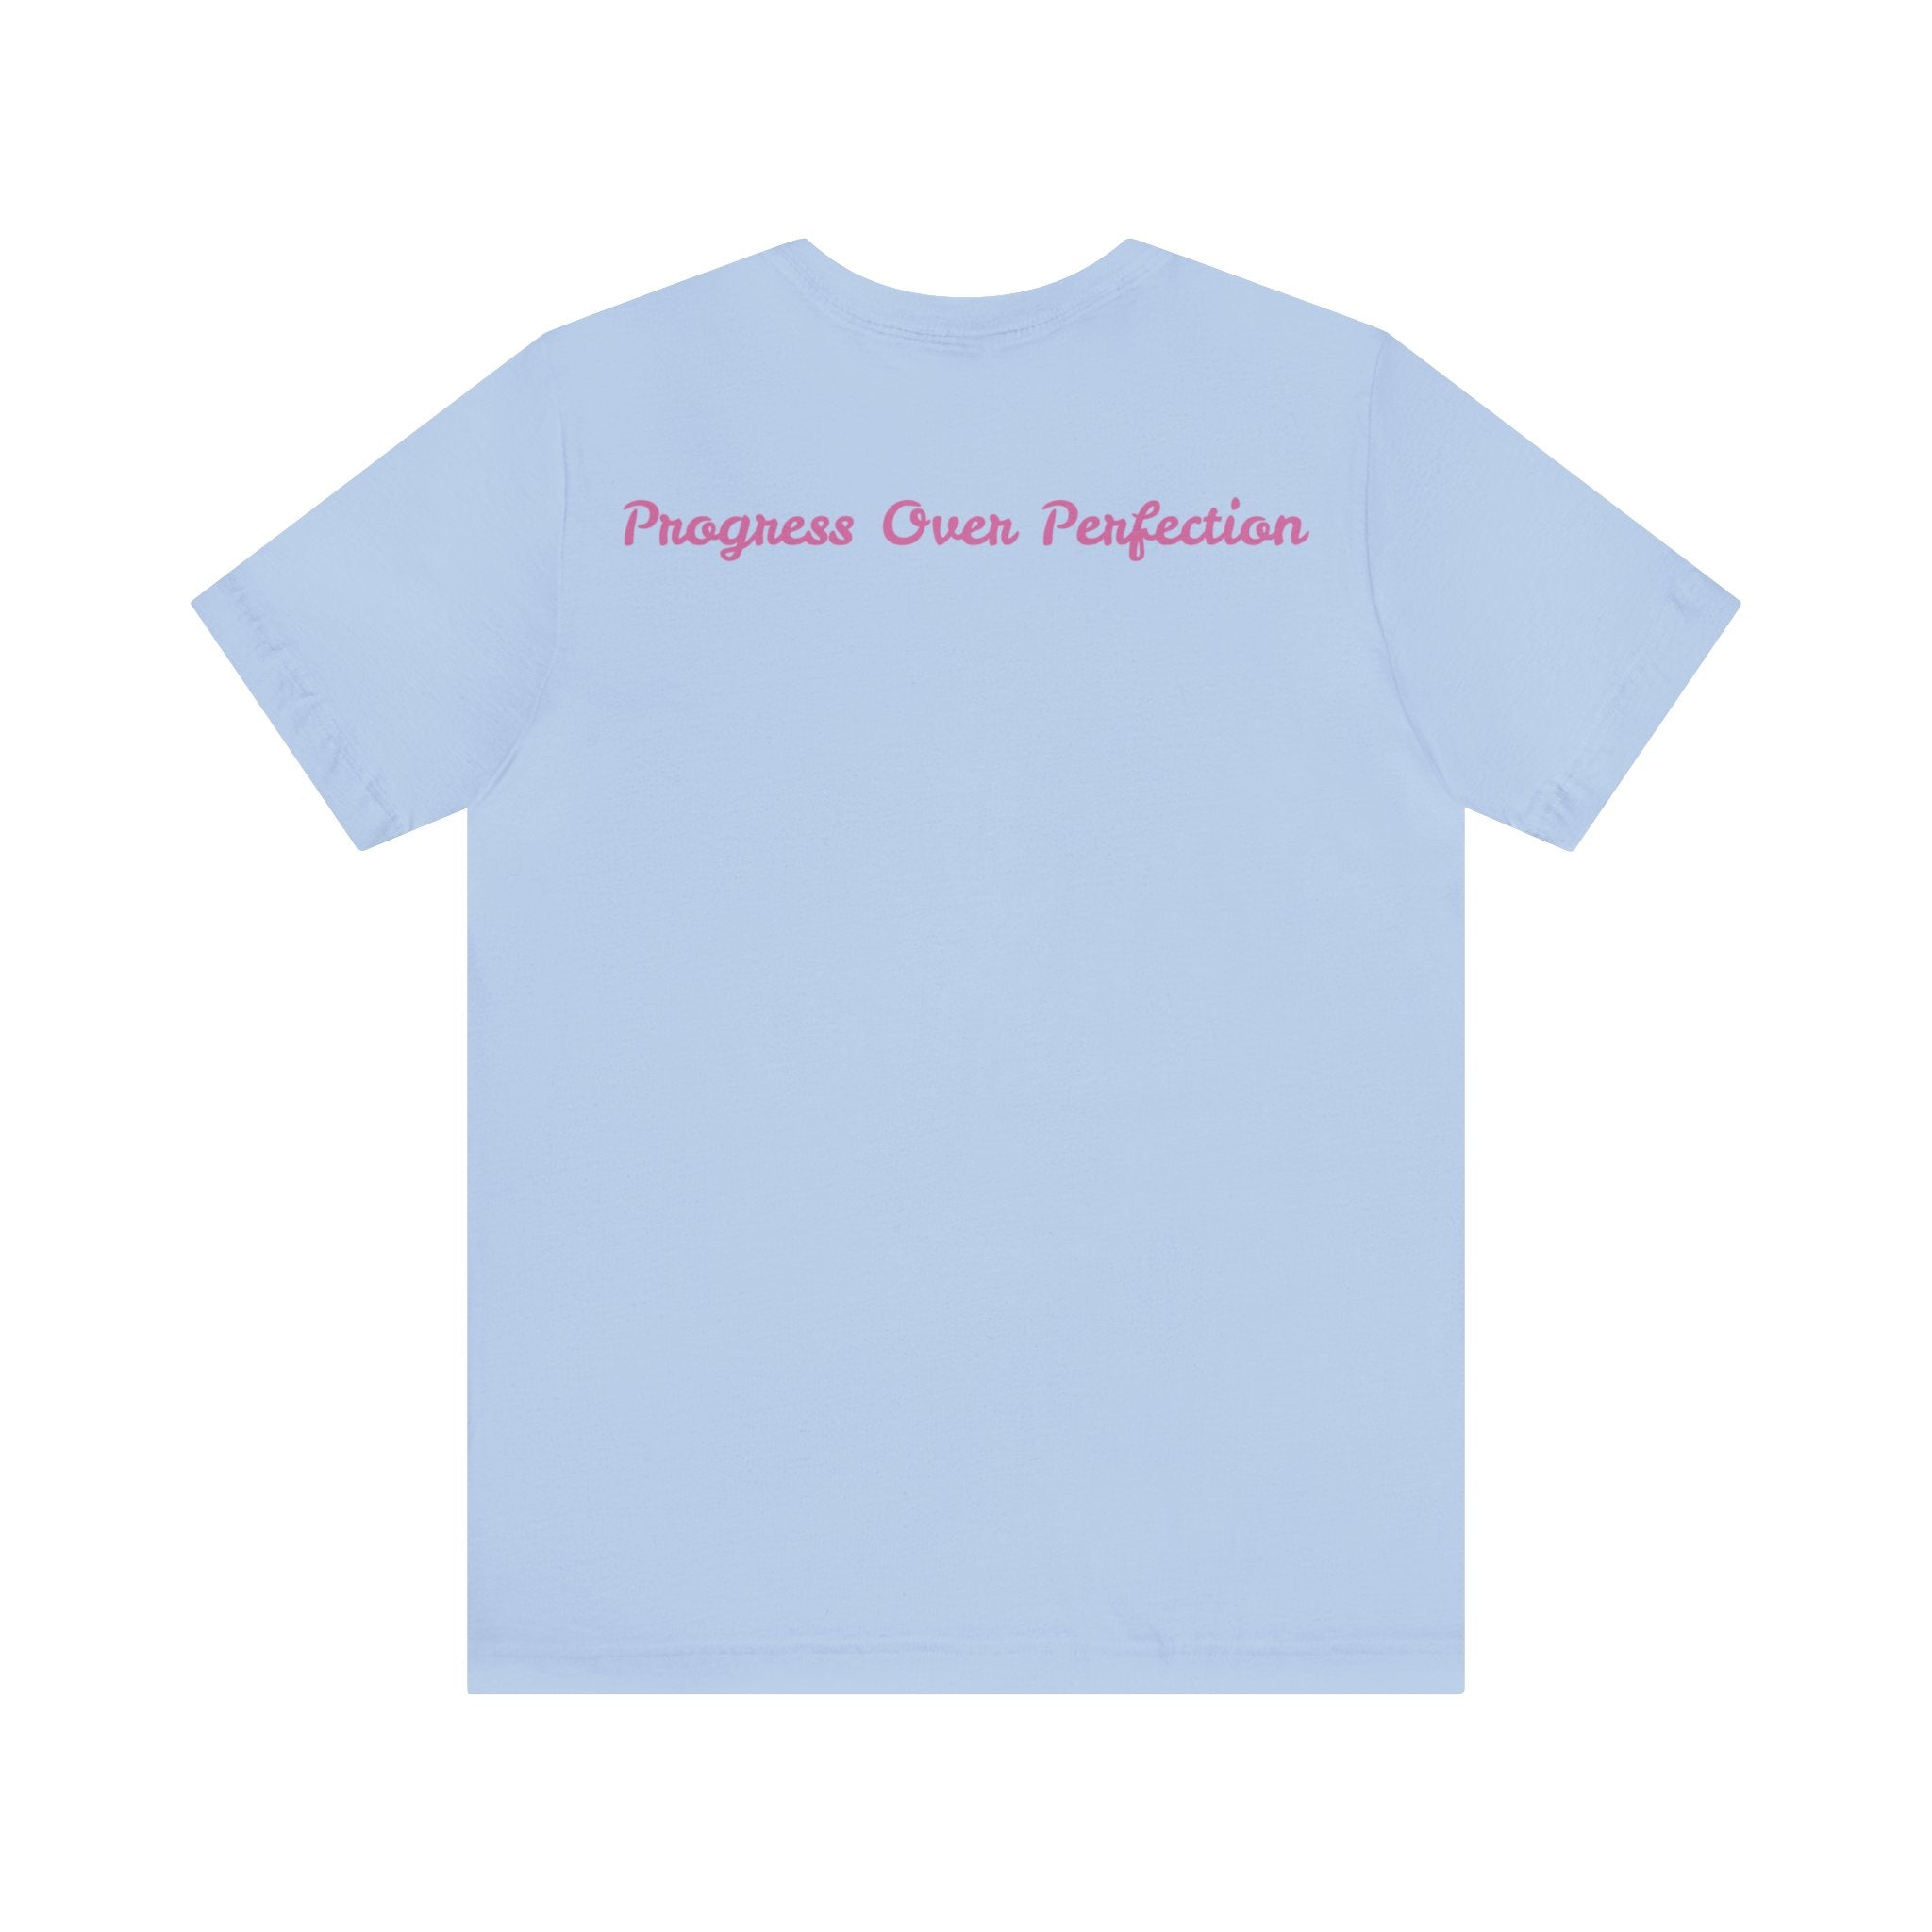 Progress Over Perfection Tee - Bella+Canvas 3001 Yellow Airlume Cotton Bella+Canvas 3001 Crew Neckline Jersey Short Sleeve Lightweight Fabric Mental Health Support Retail Fit Tear-away Label Tee Unisex Tee T-Shirt 13966535647887714423_2048 Printify